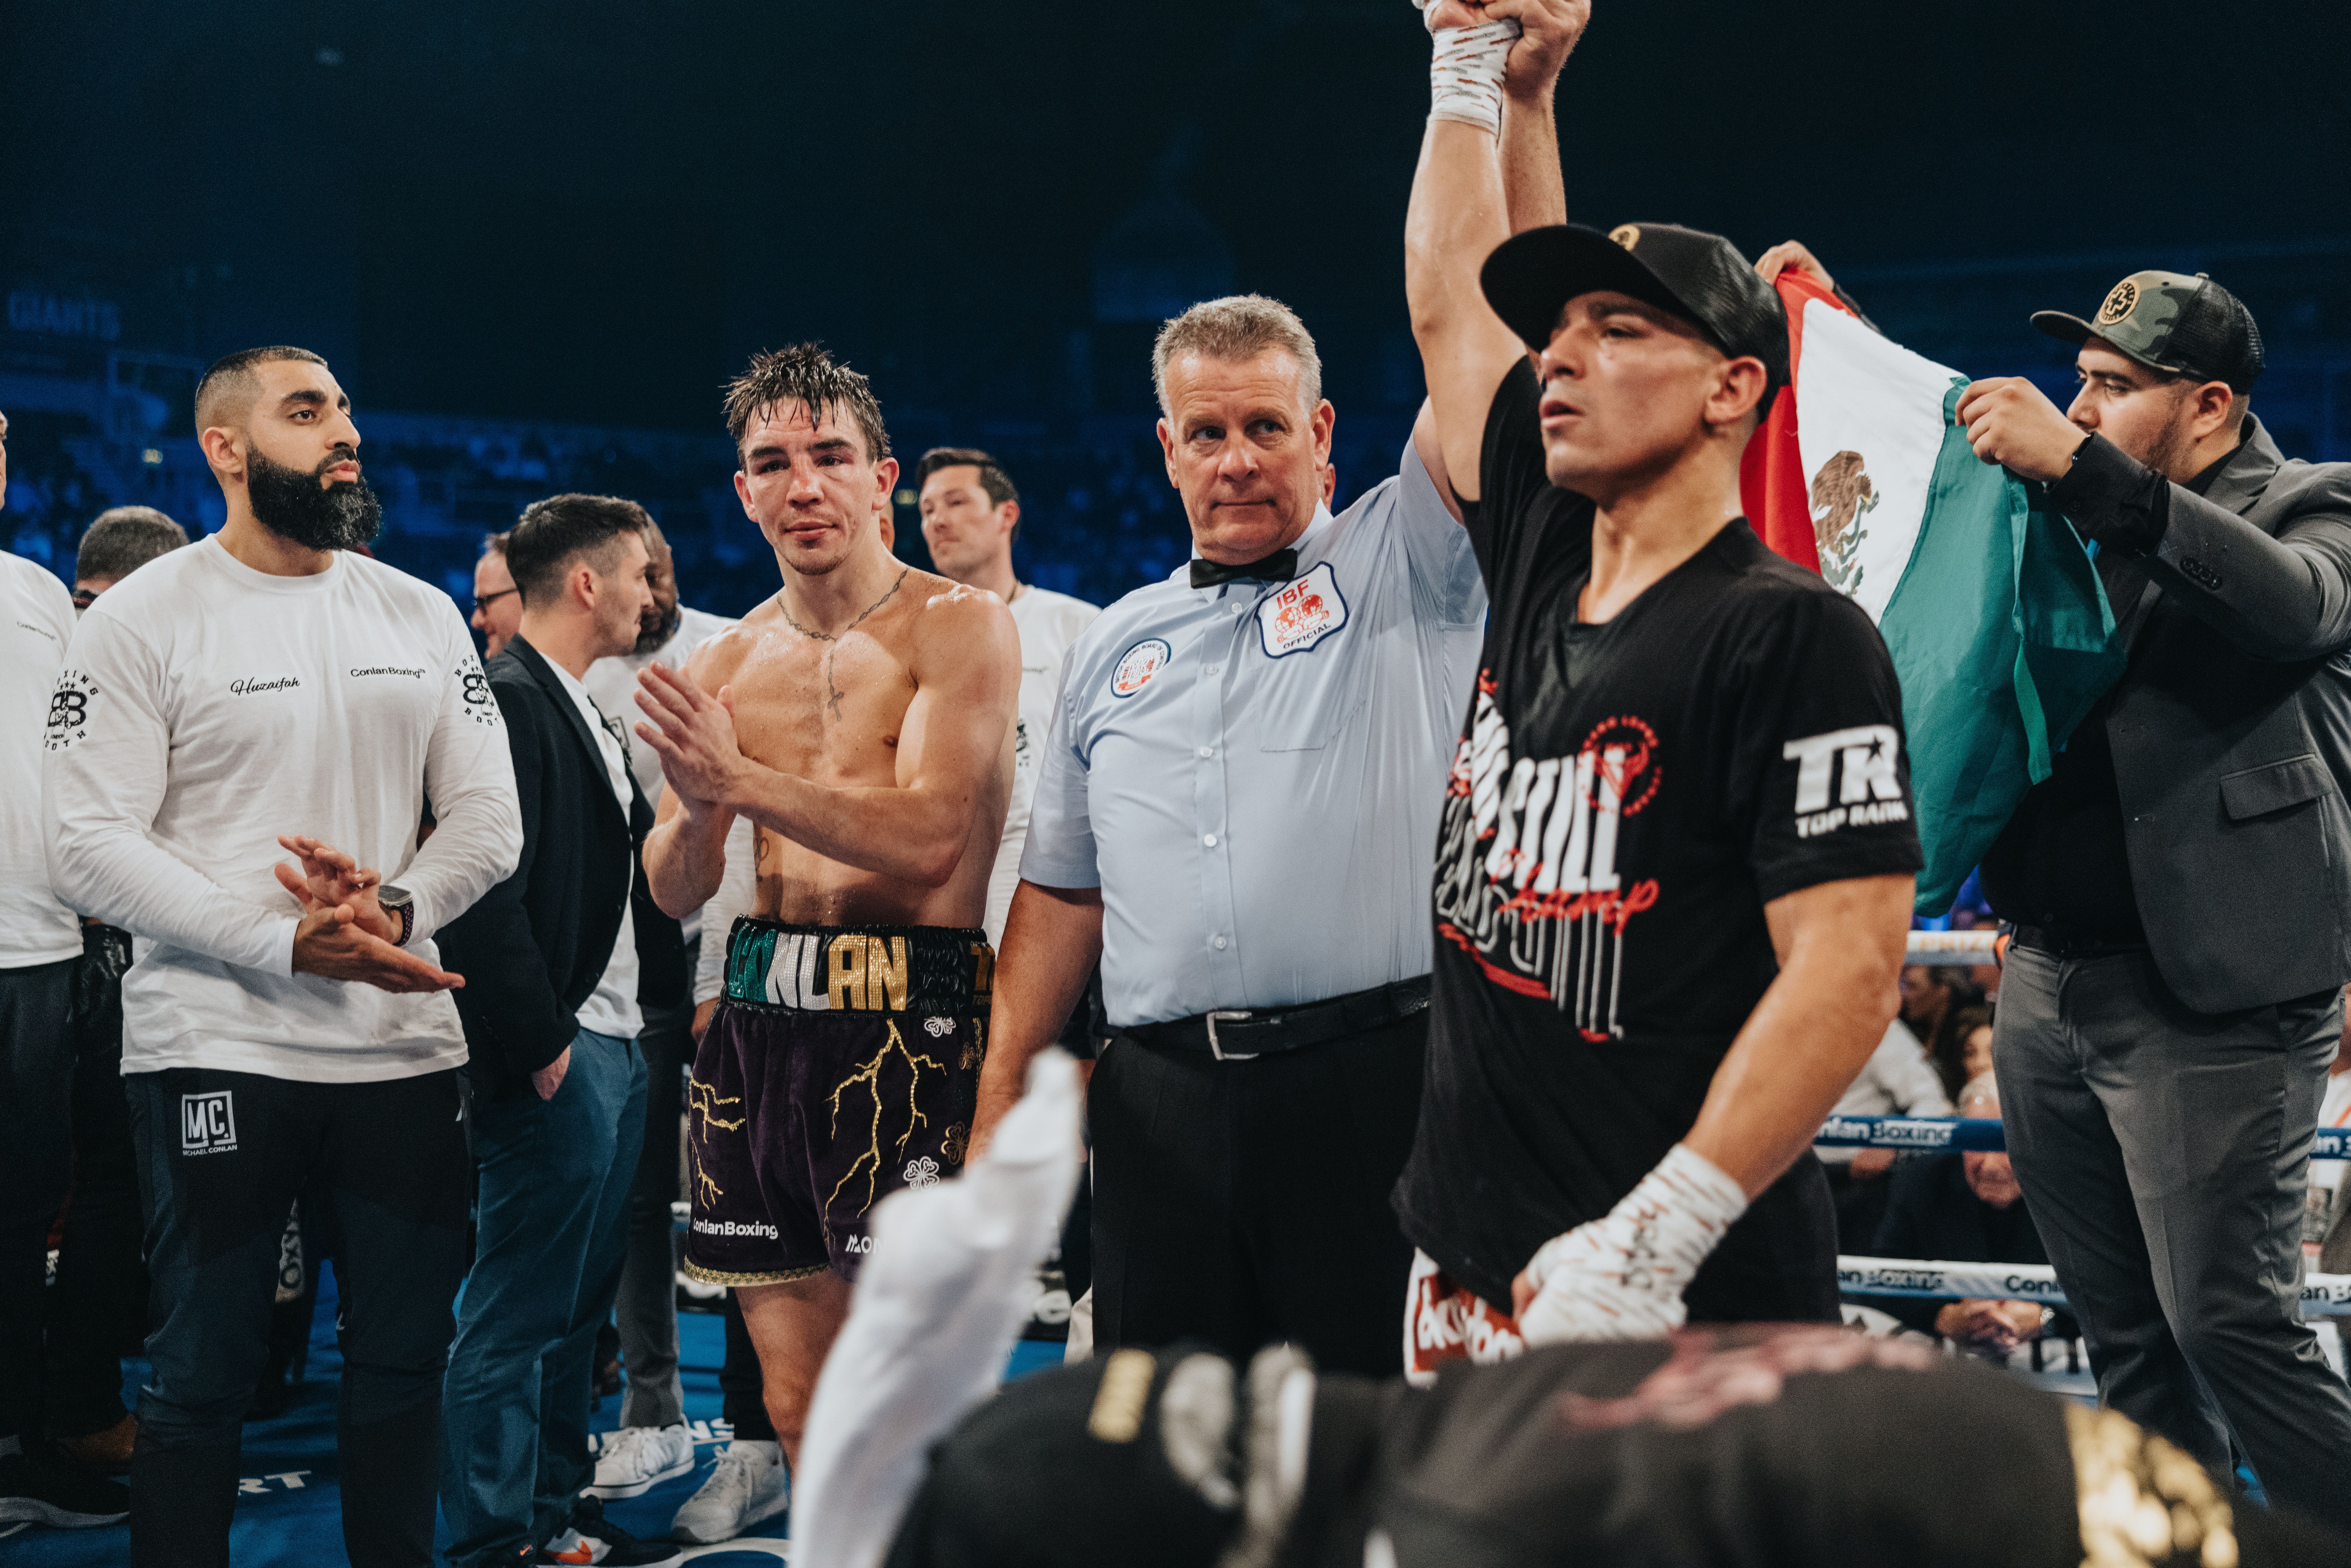 Luis Alberto Lopez has his hand raised as a dejected Michael Conlan looks on at the SSE Arena on Saturday 